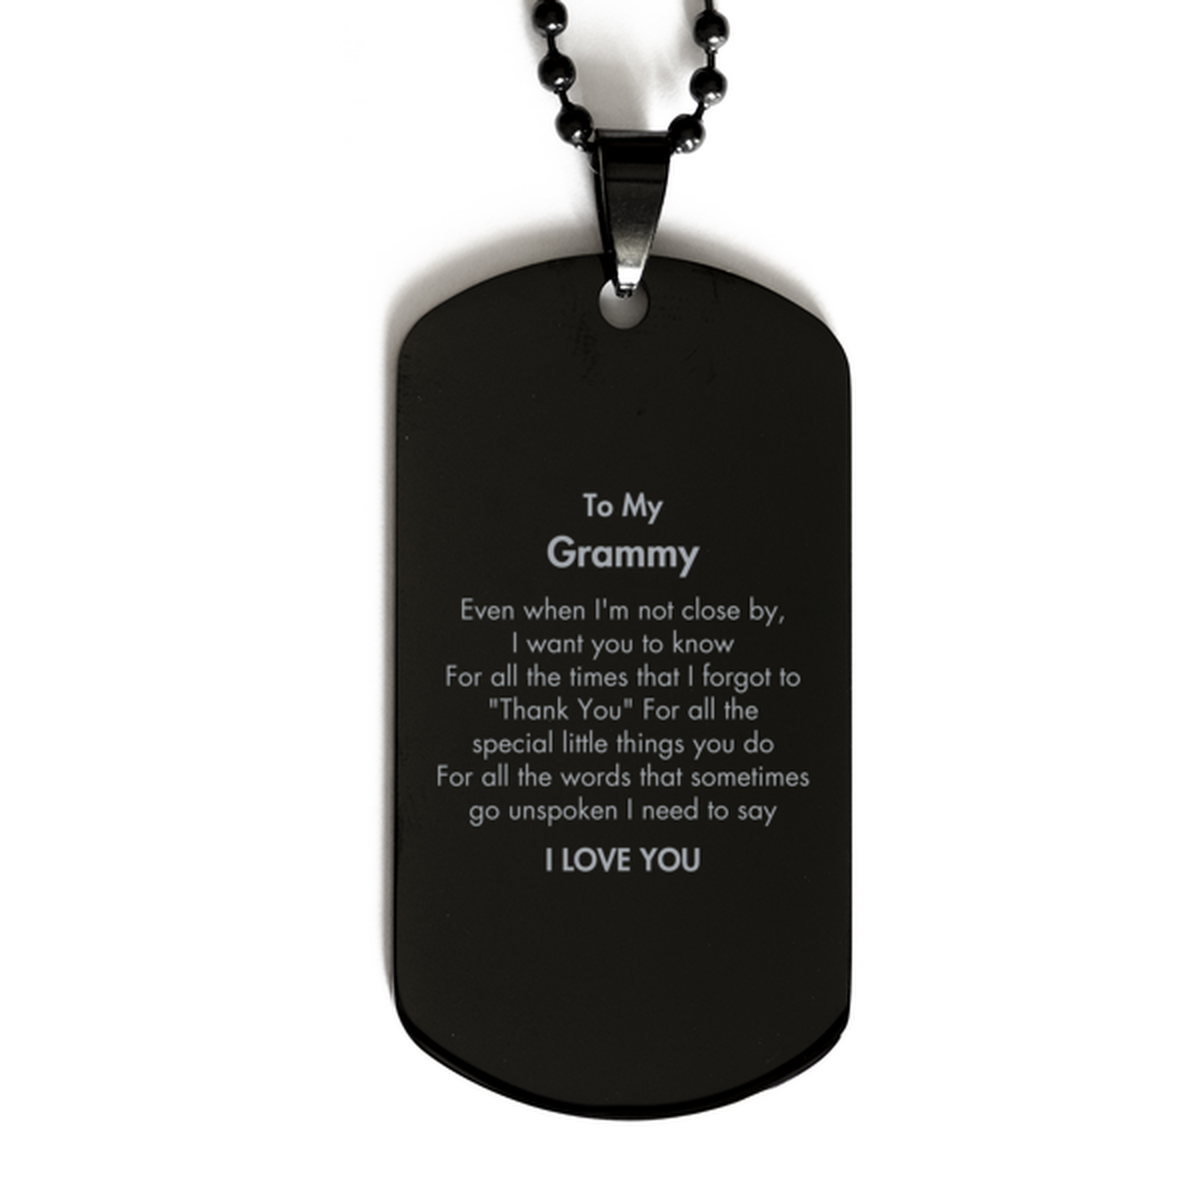 Thank You Gifts for Grammy, Keepsake Black Dog Tag Gifts for Grammy Birthday Mother's day Father's Day Grammy For all the words That sometimes go unspoken I need to say I LOVE YOU